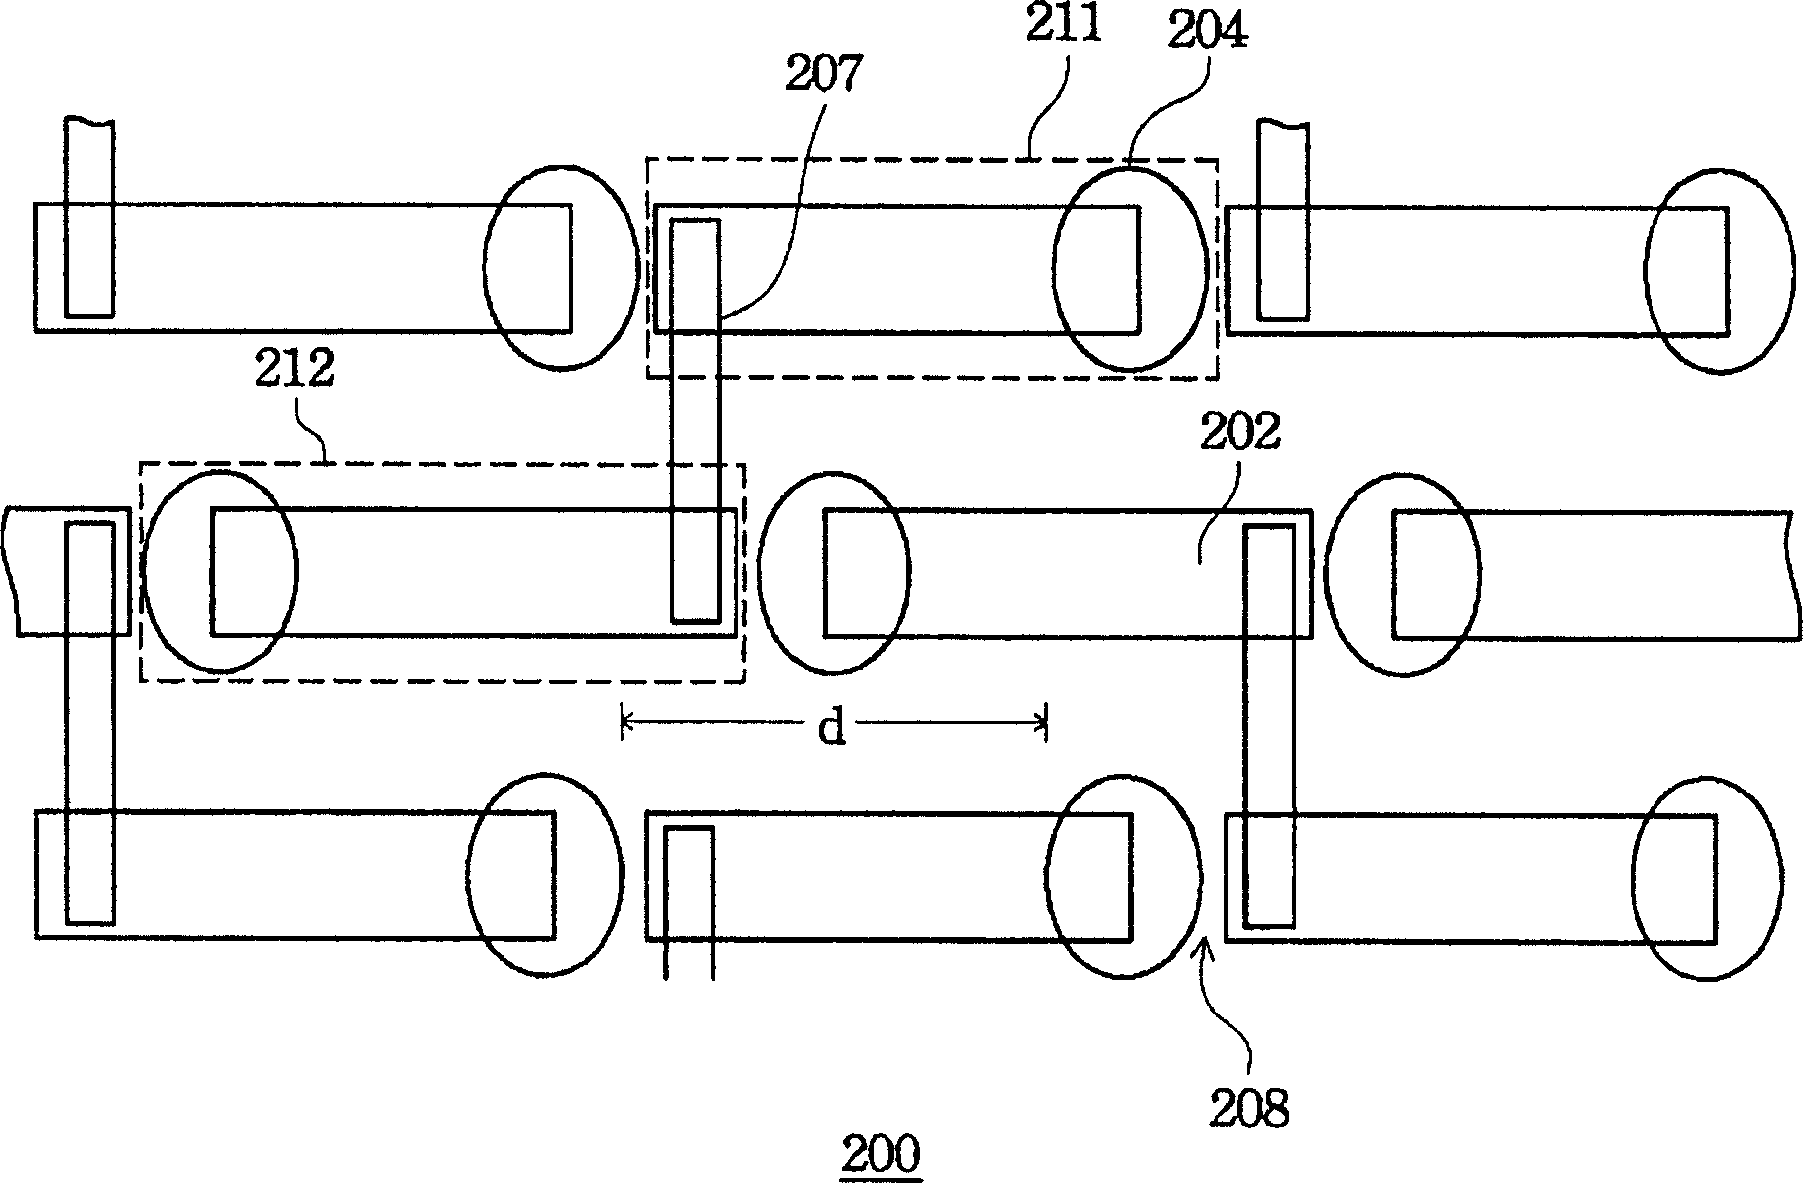 Structure of dynamic RAM